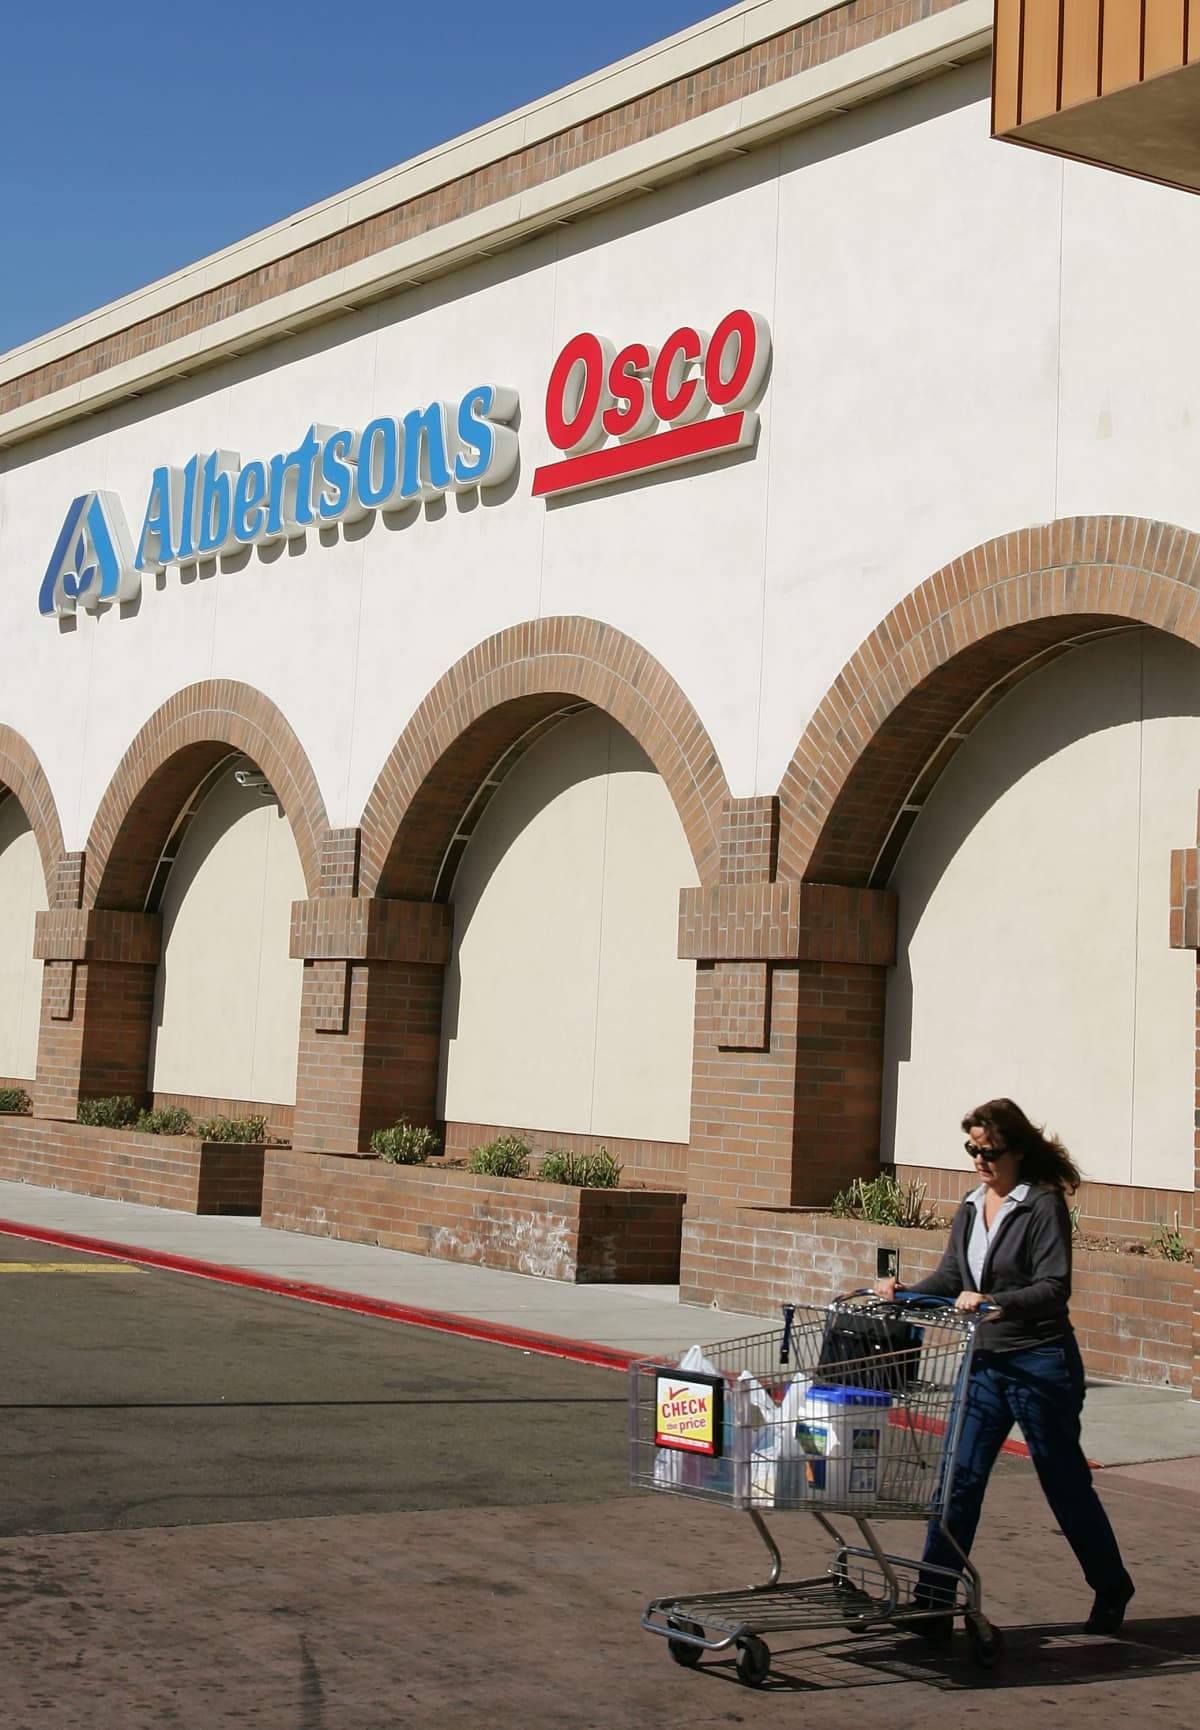 TEMPE, AZ - JANUARY 23:  A customer leaves an Albertsons store January 23, 2006 in Tempe, Arizona. An investment group that includes grocery store operator Supervalu Inc. and the drugstore chain CVS Corp. announced Monday it would would buy Albertsons for $17.4 billion in cash, stock and debt.  (Photo by Ethan Miller/Getty Images)